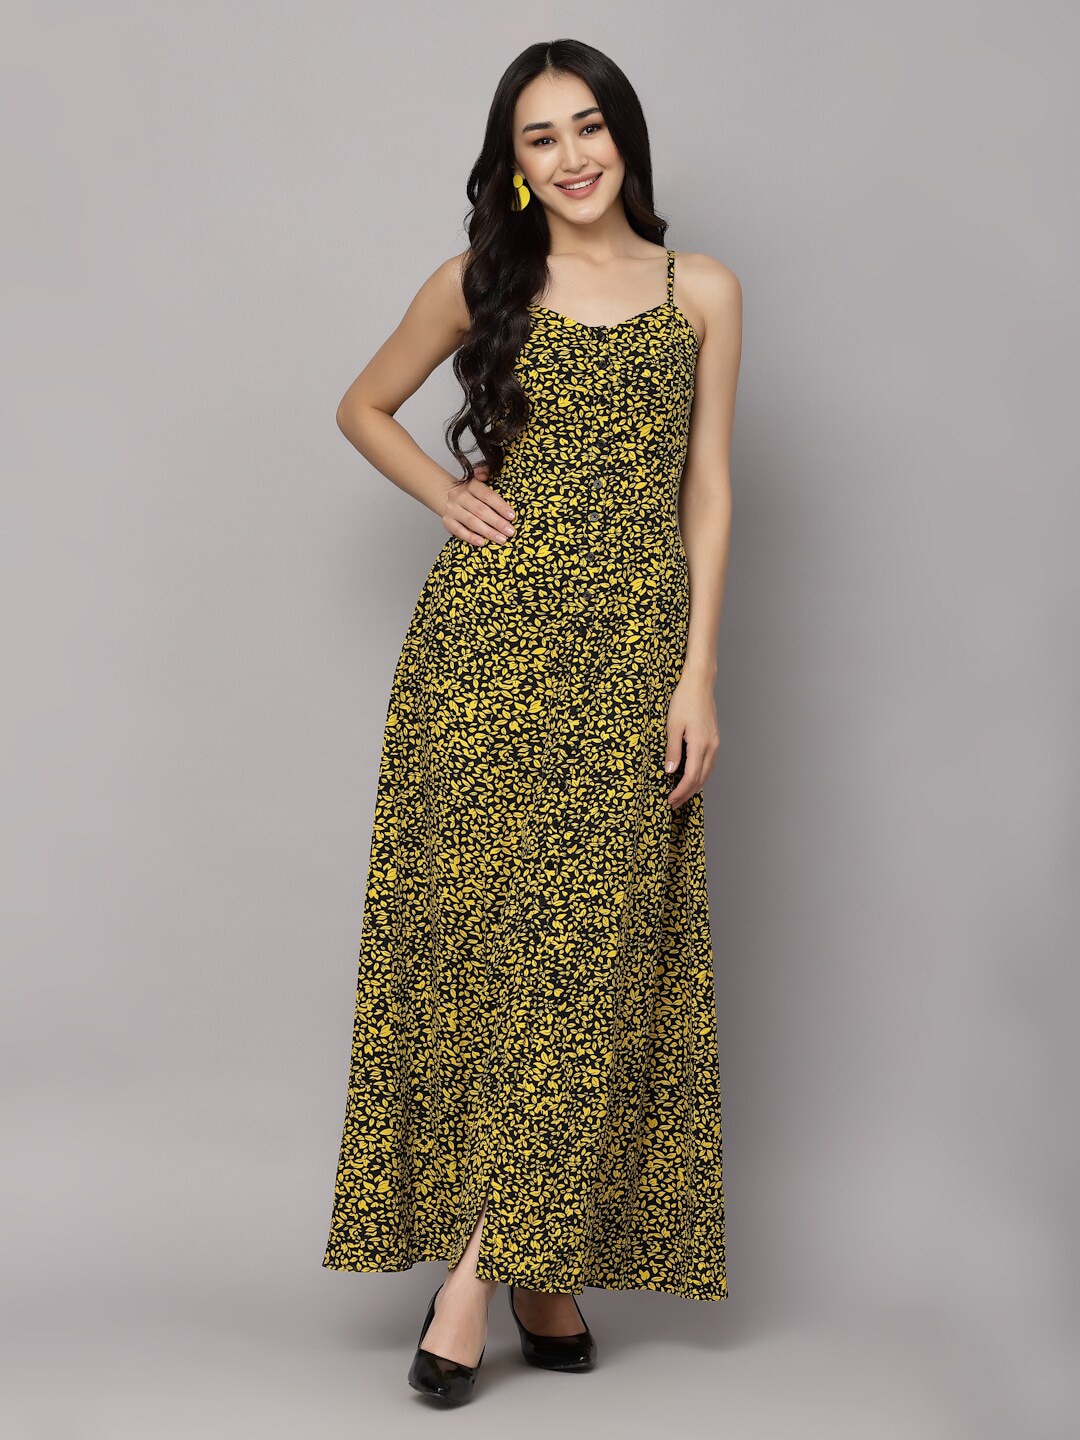 aayu Floral Printed Shoulder Straps Smocked Maxi Dress Price in India